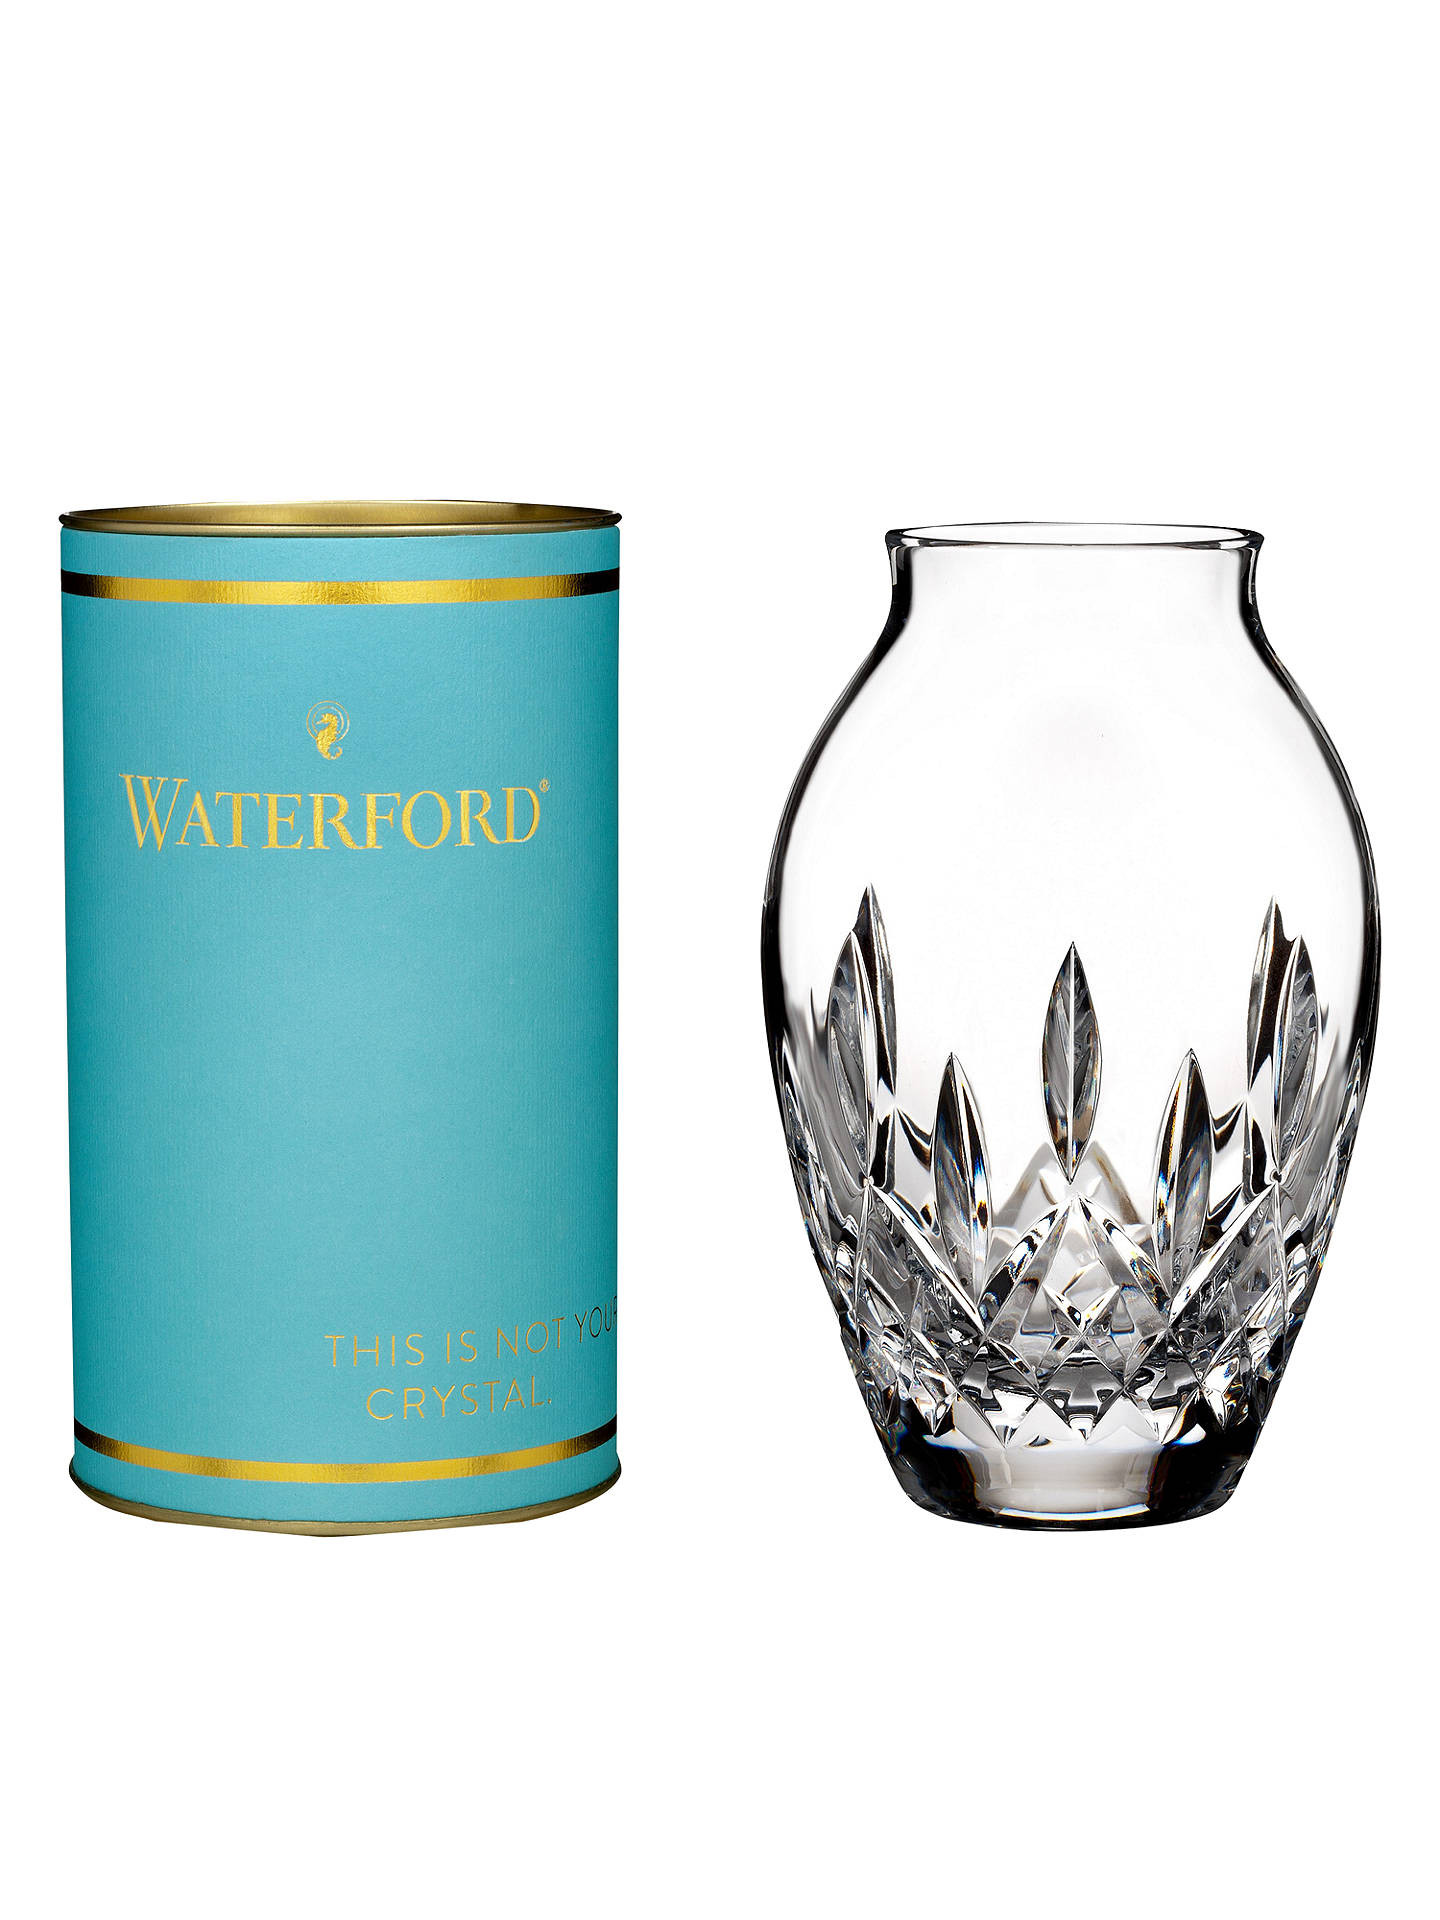 27 Trendy Waterford Giftology Lismore Candy Bud Vase 2024 free download waterford giftology lismore candy bud vase of waterford giftology lismore candy bud vase clear at john lewis intended for buywaterford giftology lismore candy bud vase clear online at johnle